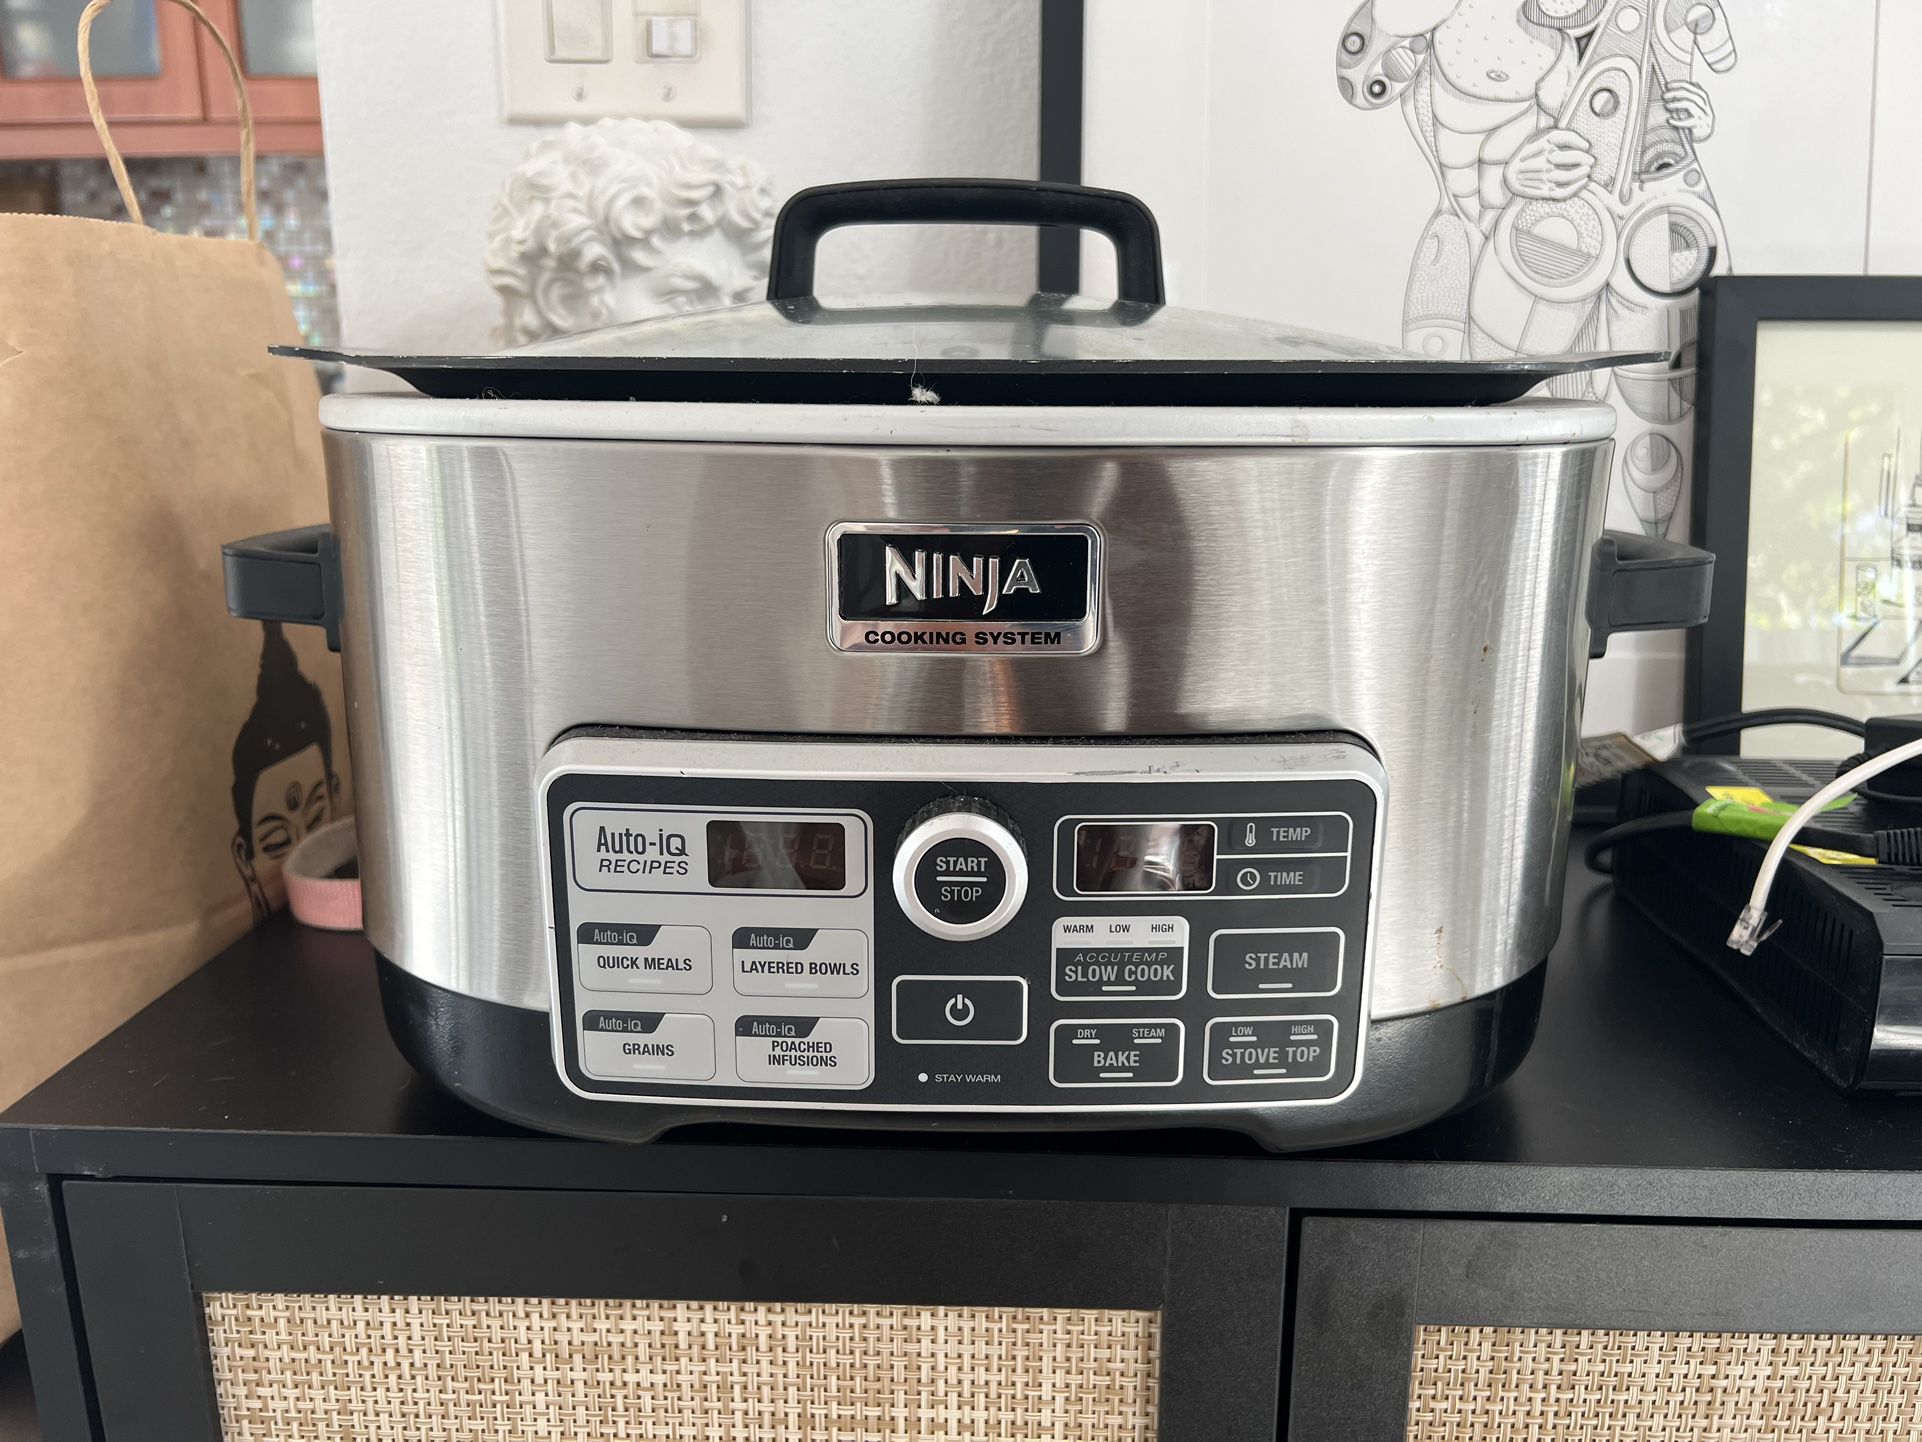 Ninja Cooking System Slow Cooker with Auto-IQ